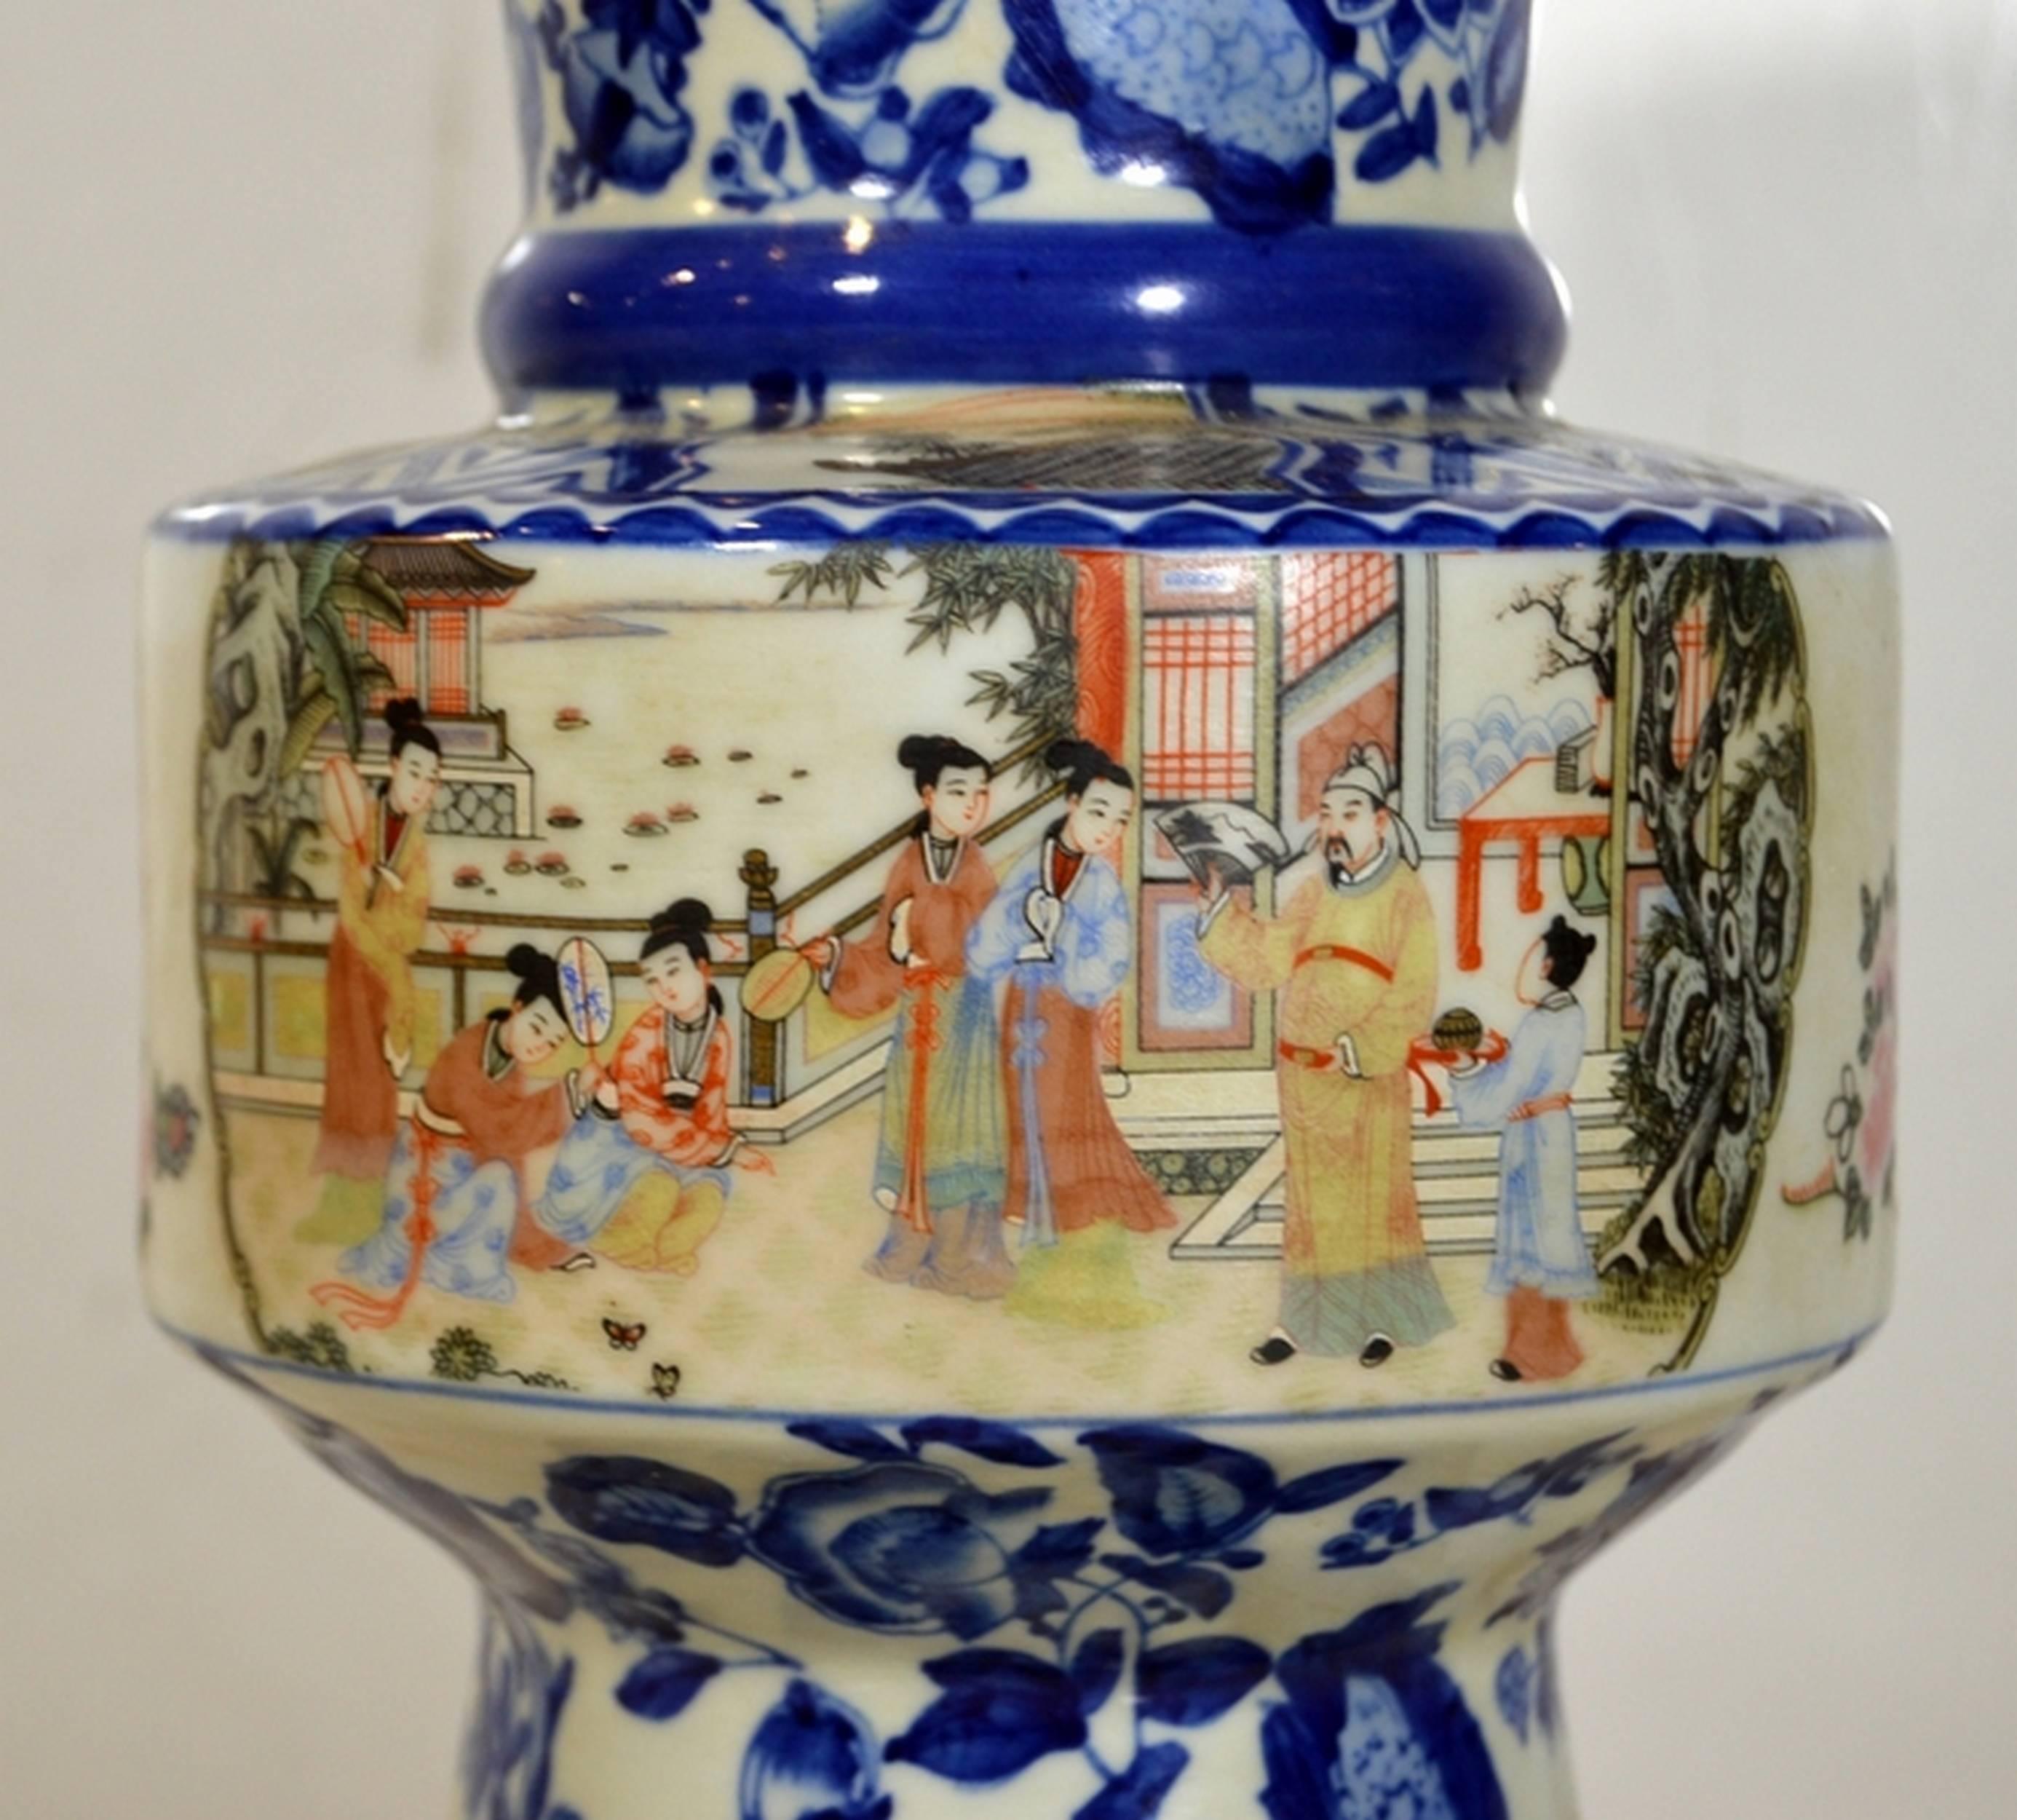 Vintage Chinese Hand-Painted Porcelain Lamp with Characters from the 1970s In Good Condition For Sale In Yonkers, NY